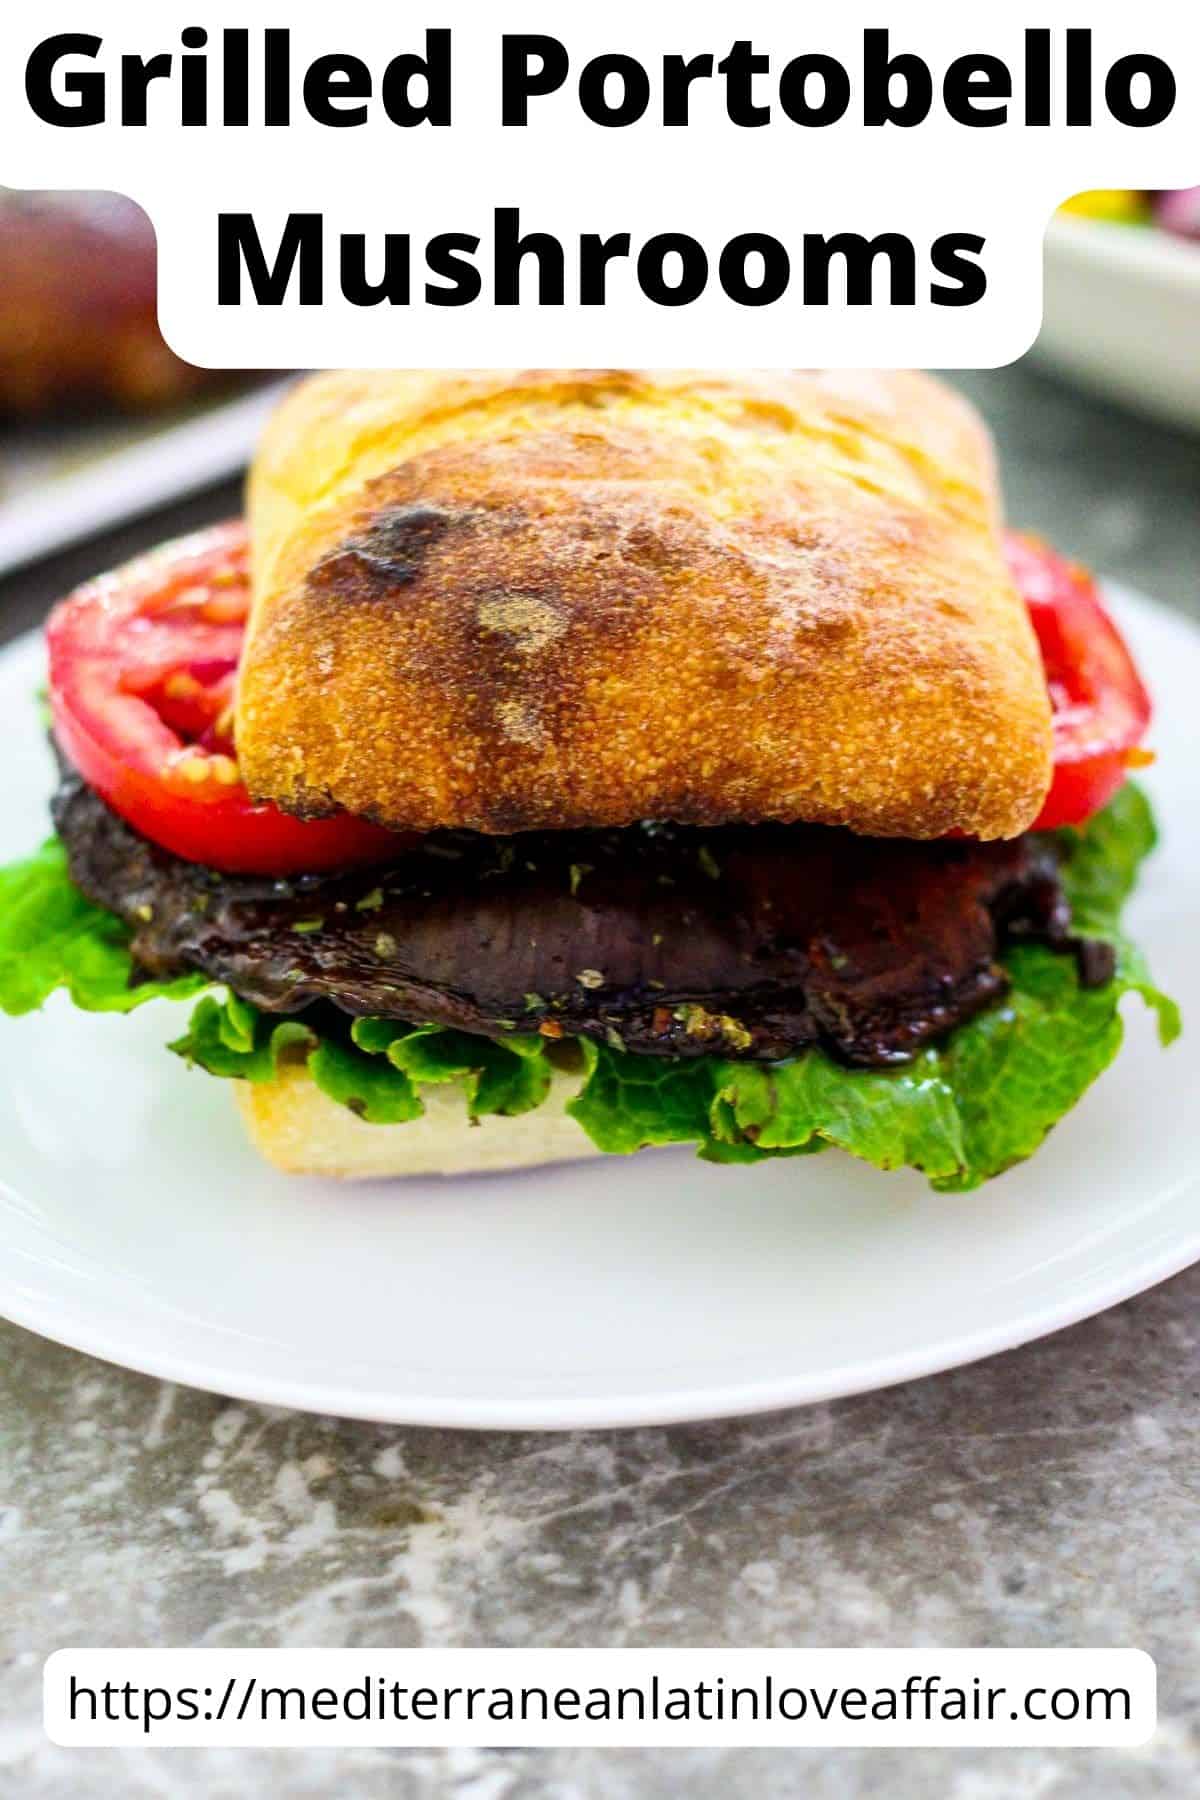 An image prepared for Pinterest. It shows a sandwich with grilled portobello mushrooms, tomatoes, lettuce on an artisanal roll. The image has a title bar that reads Grilled Portobello Mushrooms and a website link to the bottom. 